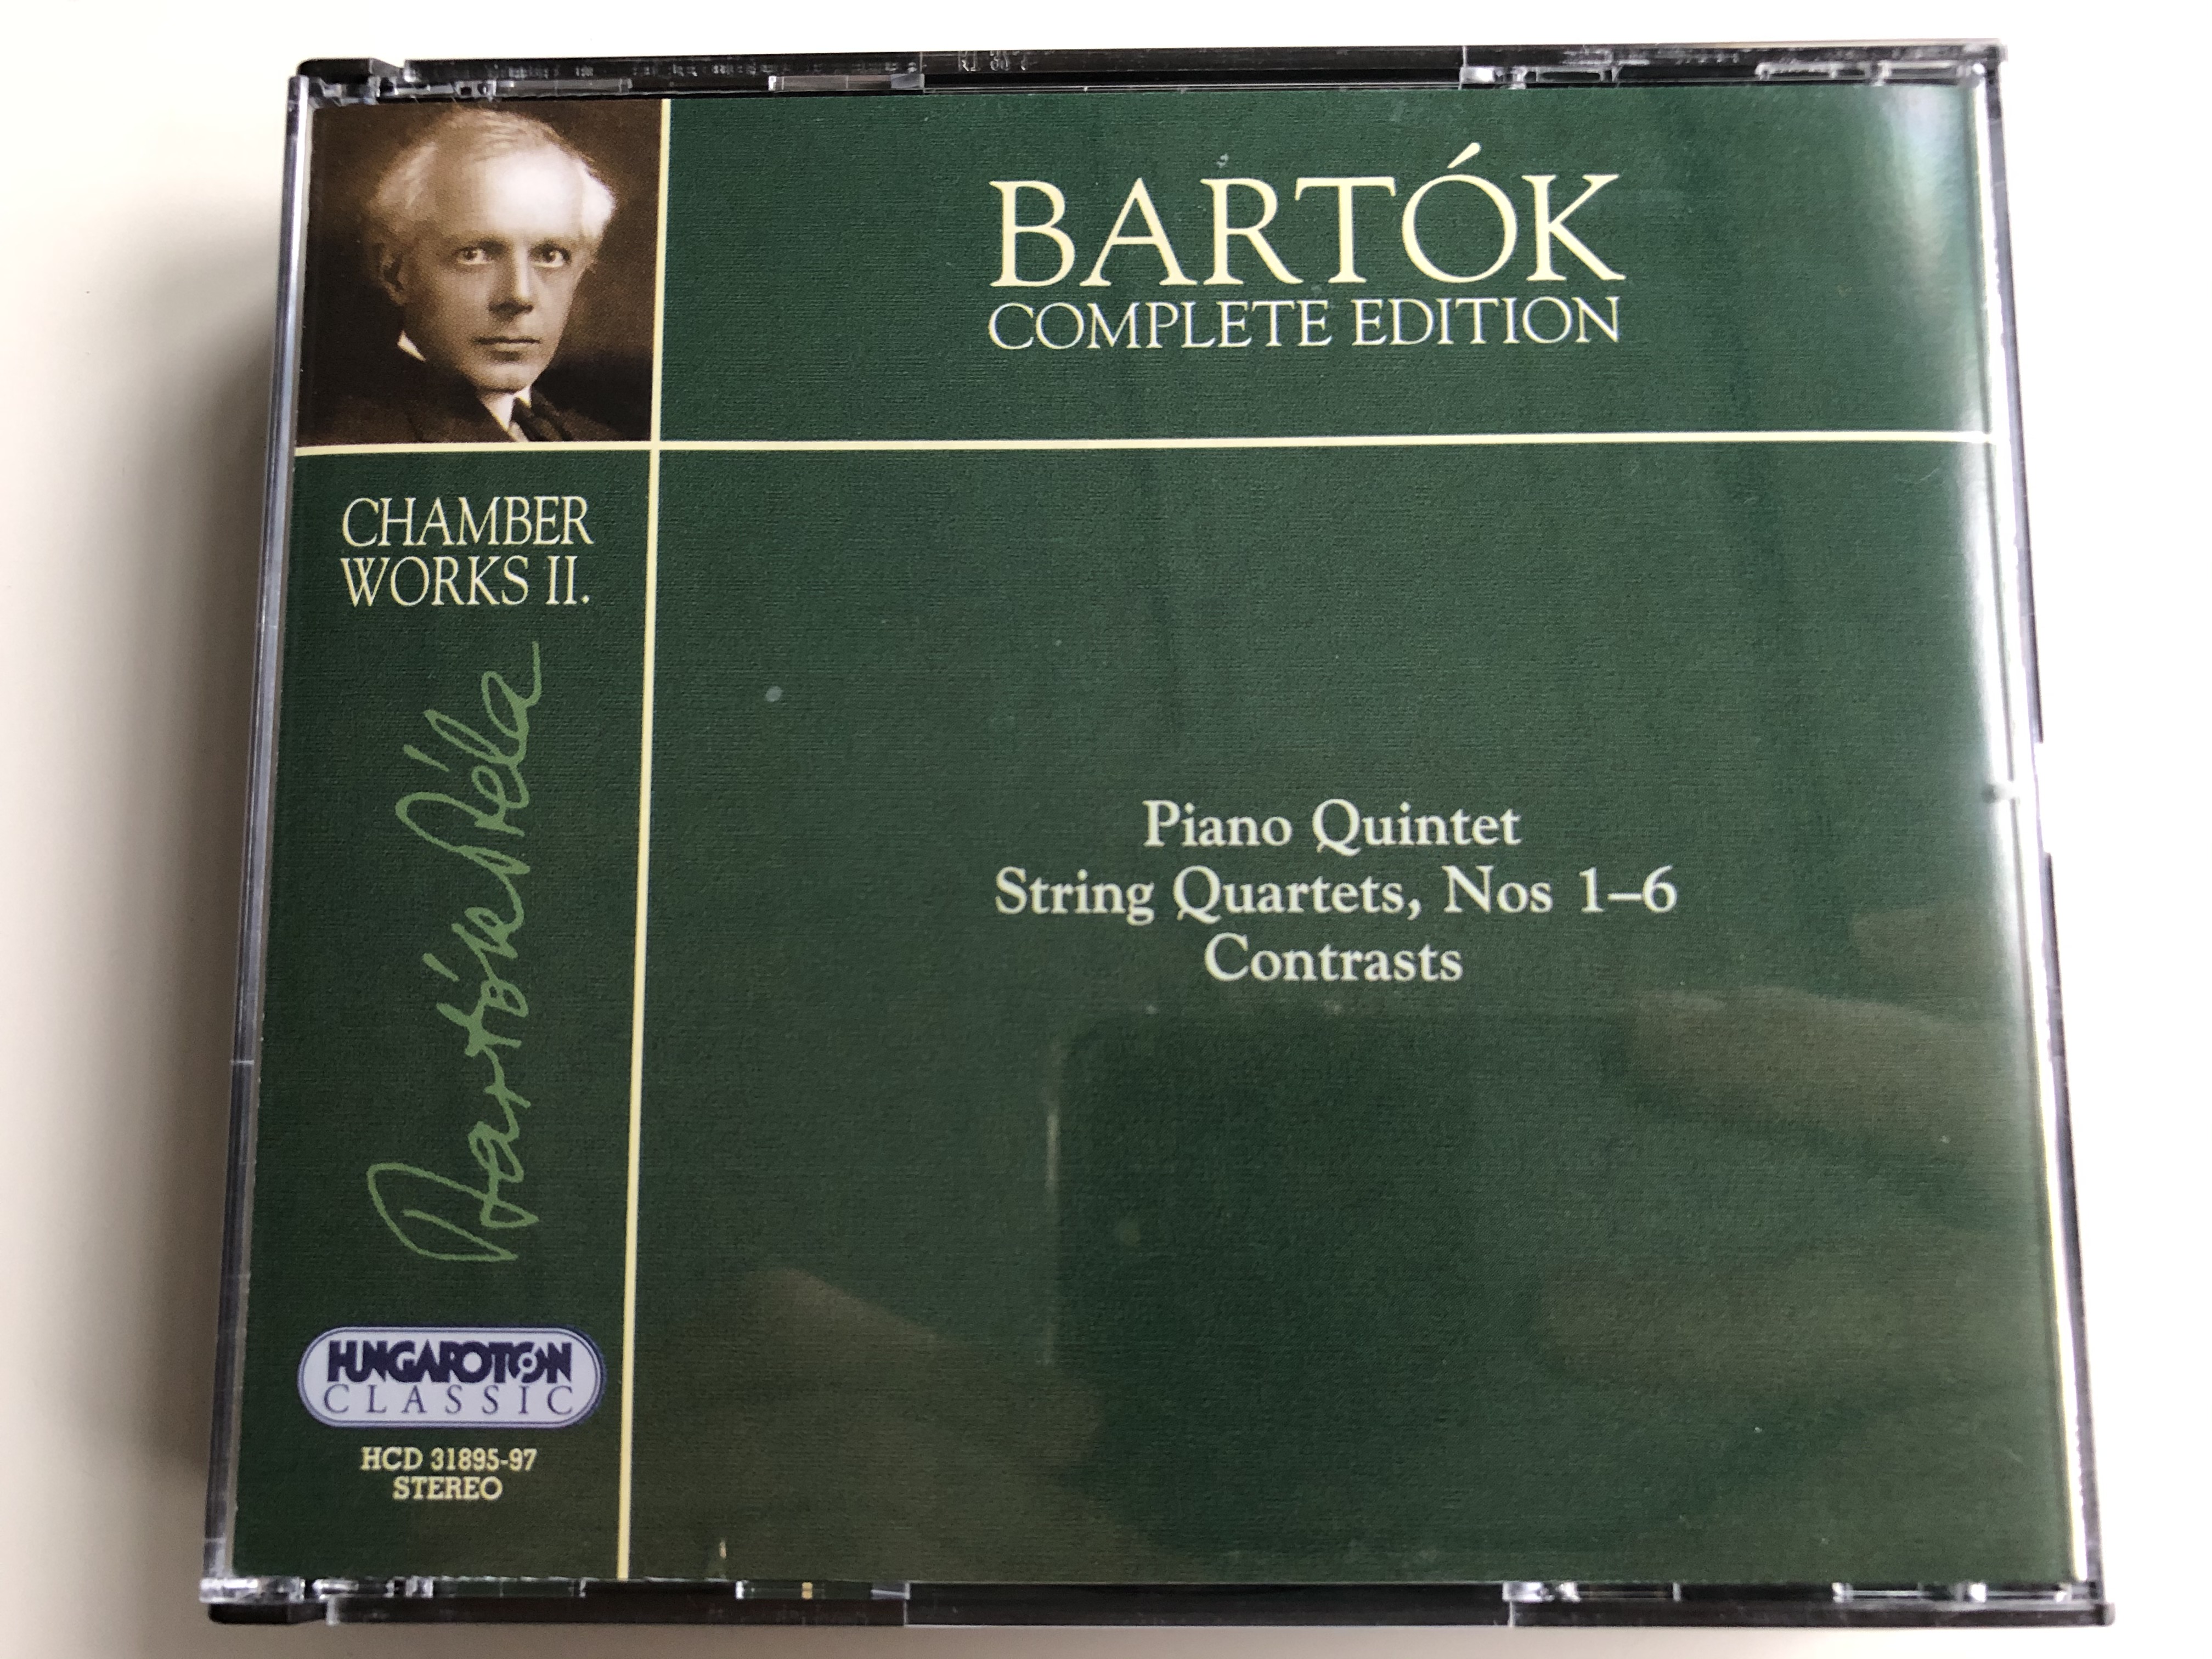 bartok-complete-edition-chamber-works-ii.-piano-quintet-string-quartets-nos-1-6-contrasts-hungaroton-classic-3x-audio-cd-2000-stereo-hcd-31895-97-1-.jpg